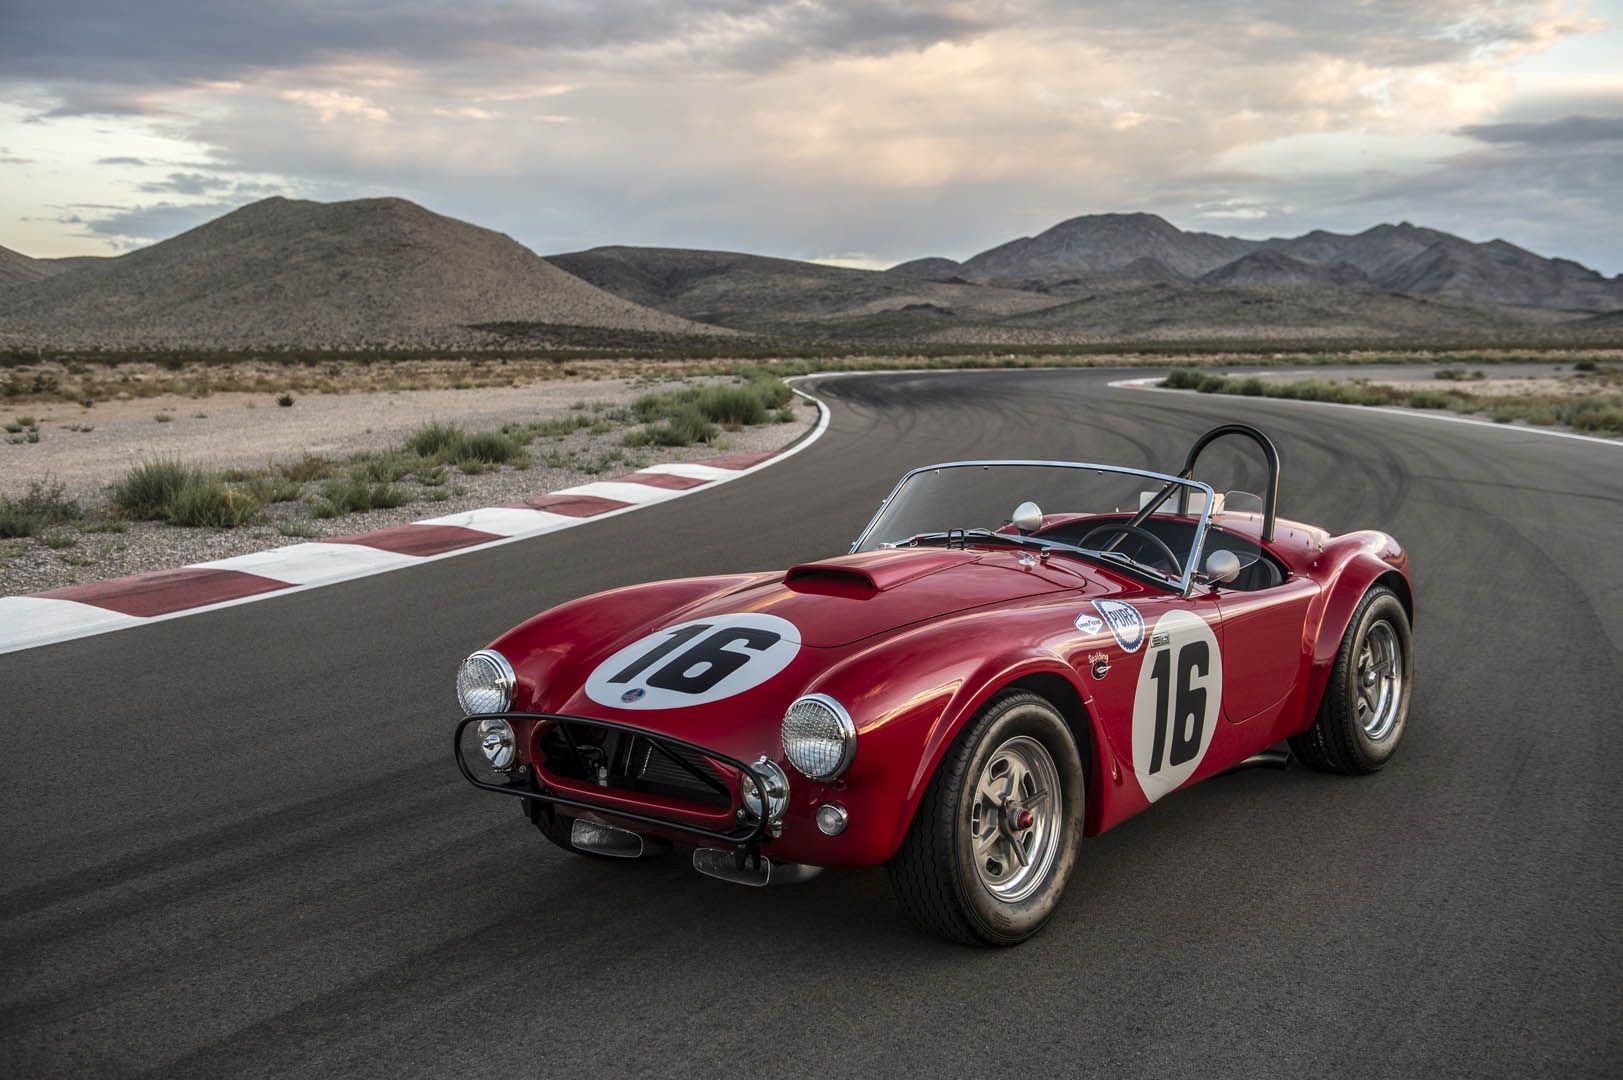 Superformance, Shelby Legendary Cars Announce Replica Car Manufacturing Plans | THE SHOP